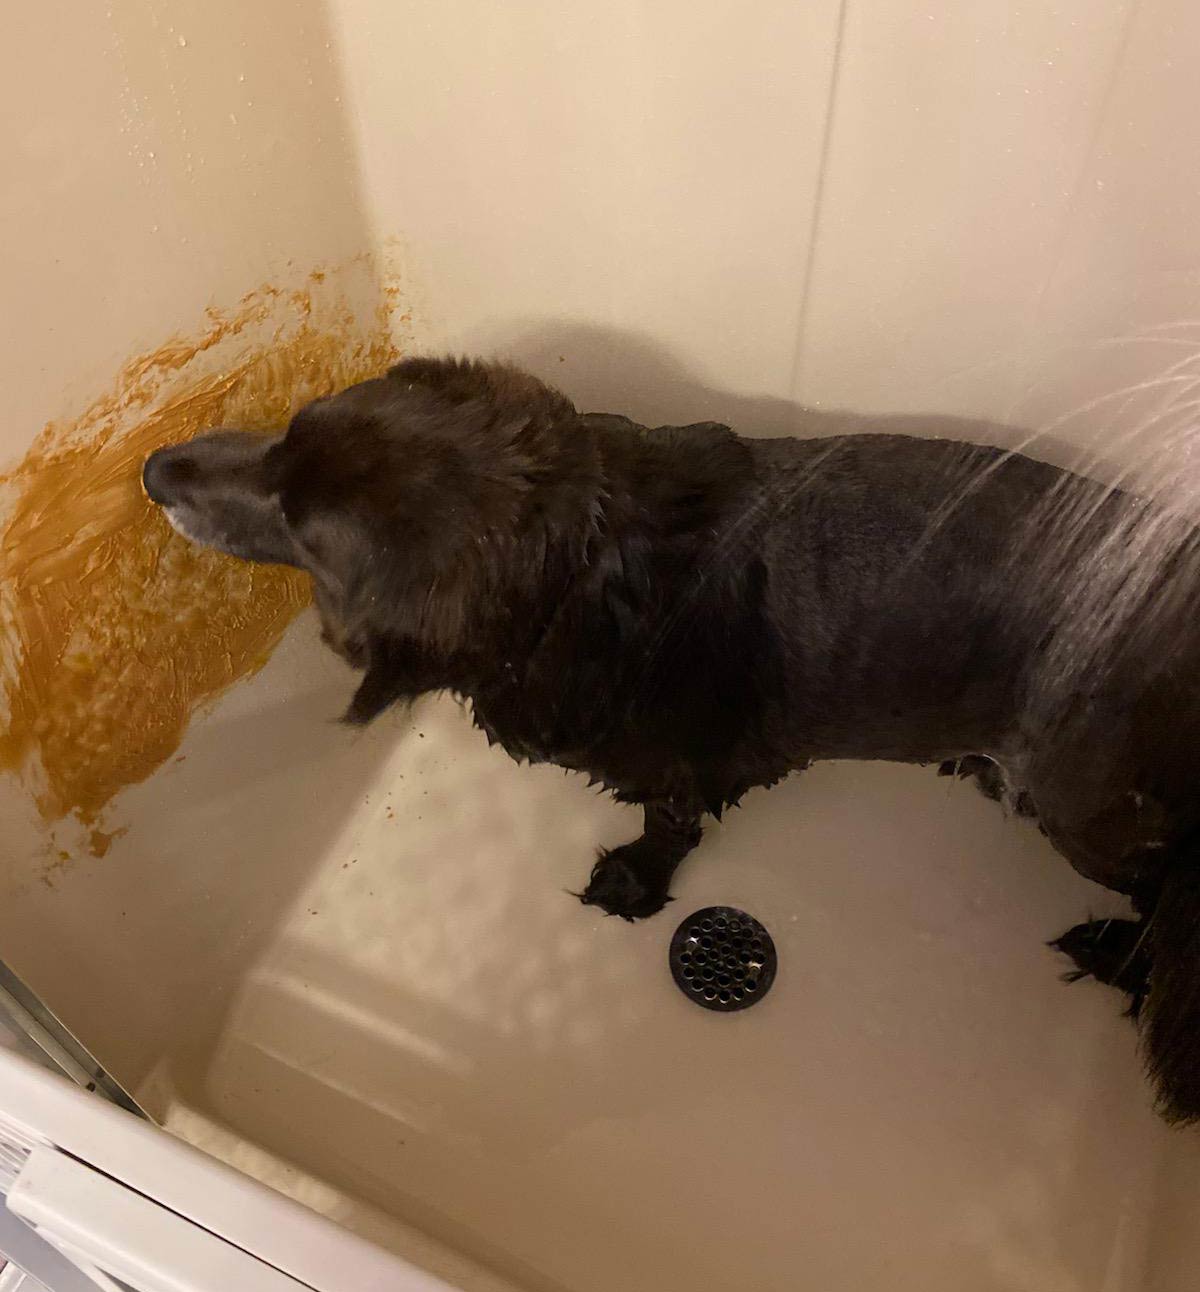 My cousins uses peanut butter to keep the dog still during a bath